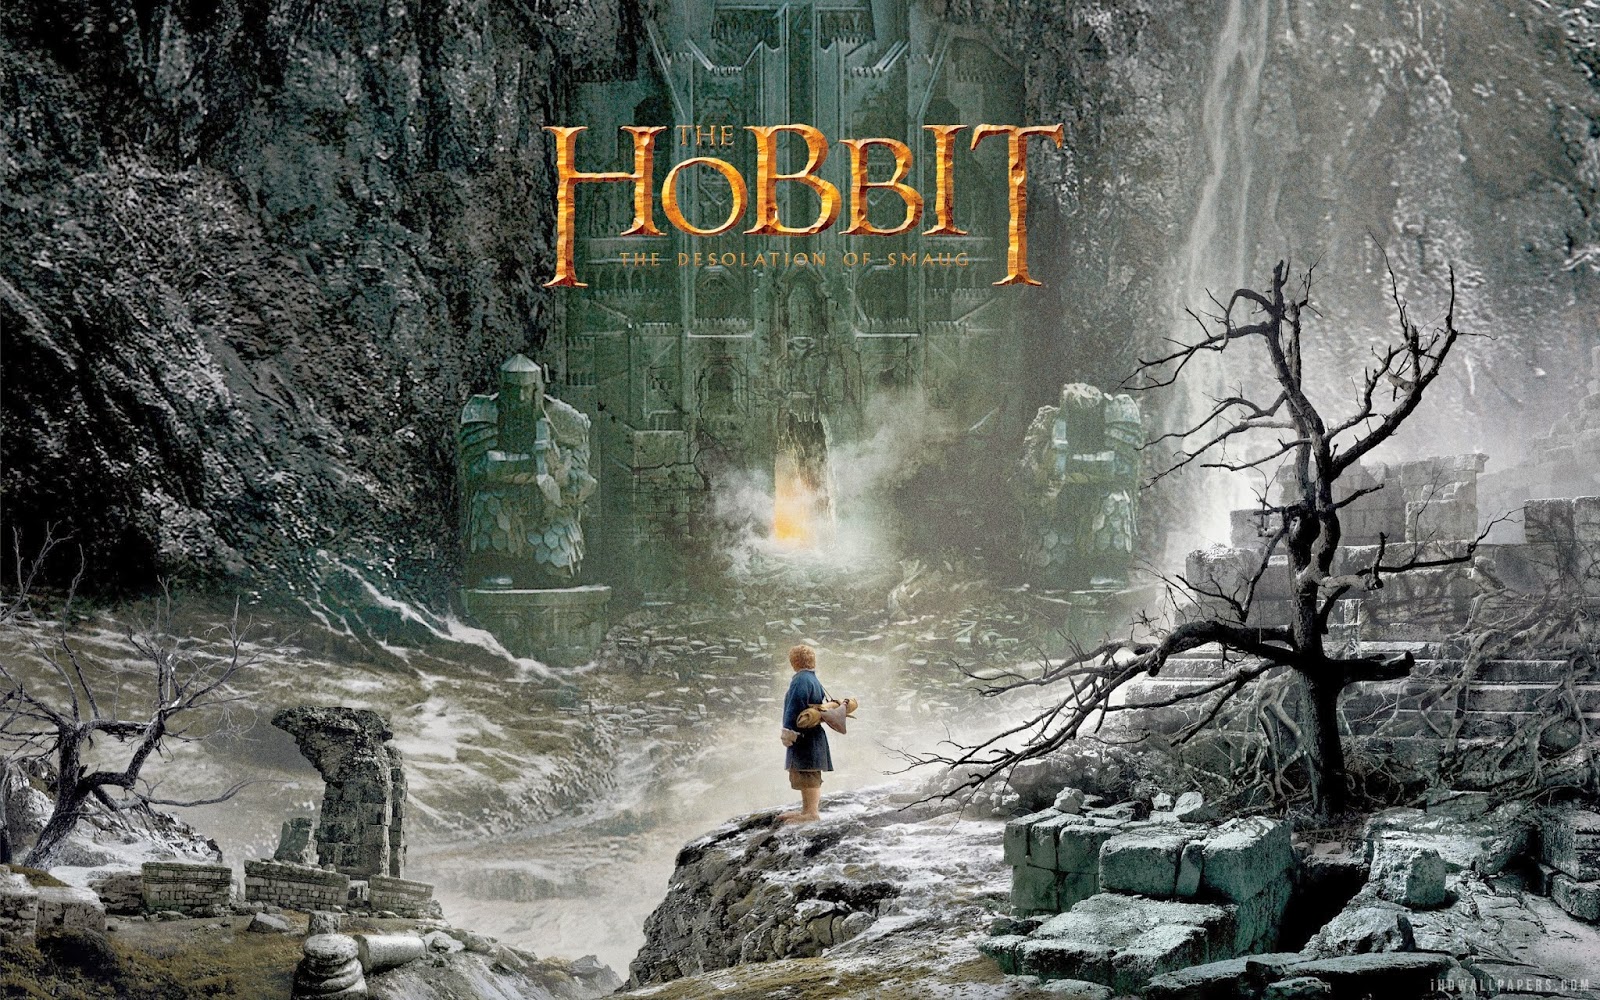 A Movie Review of The Hobbit: The Desolation of Smaug | The Journey